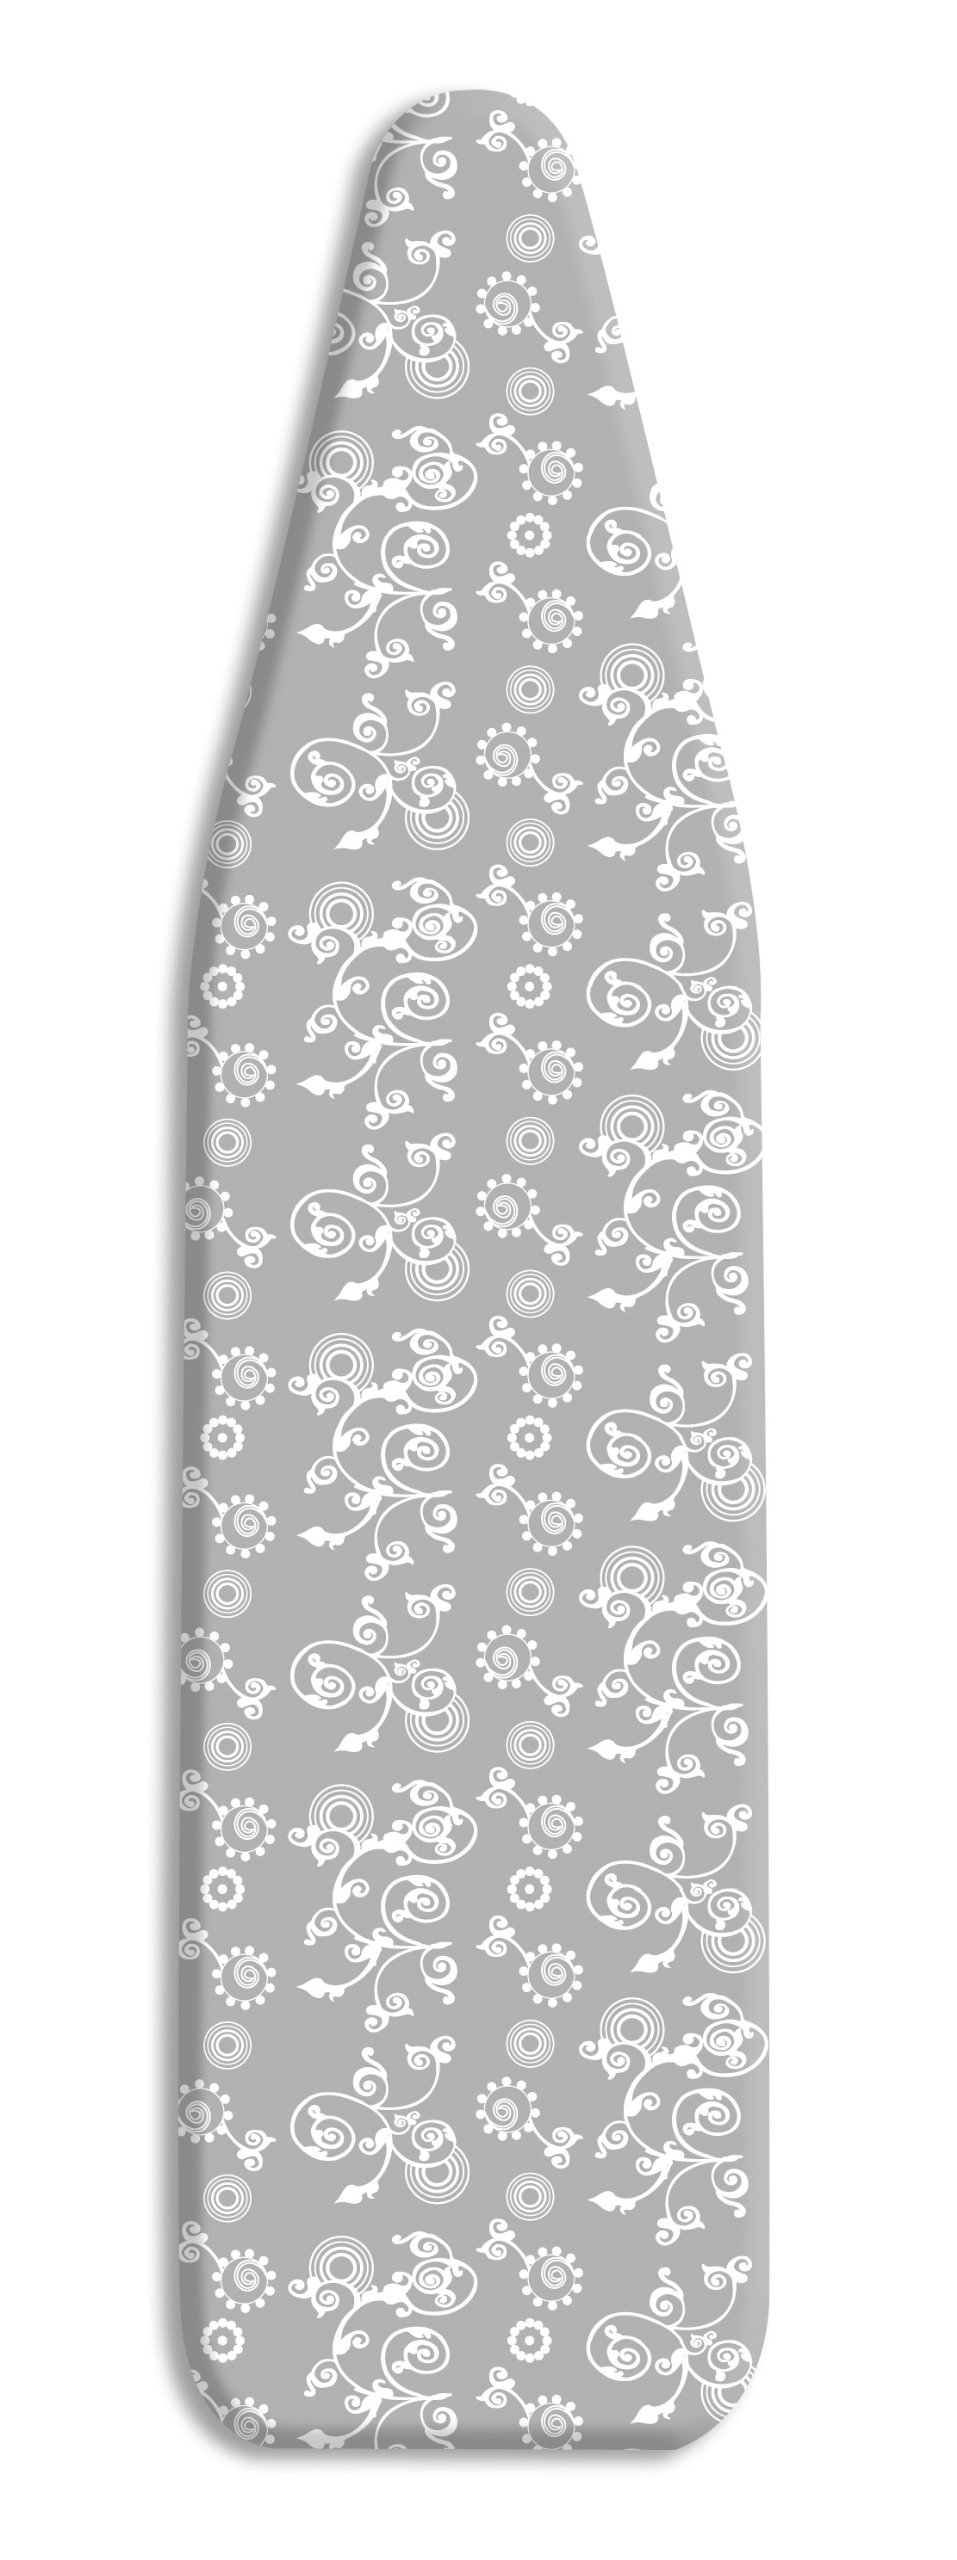 Whitmor Scorch Resistant Ironing Board Cover and Pad - Grey Swirl